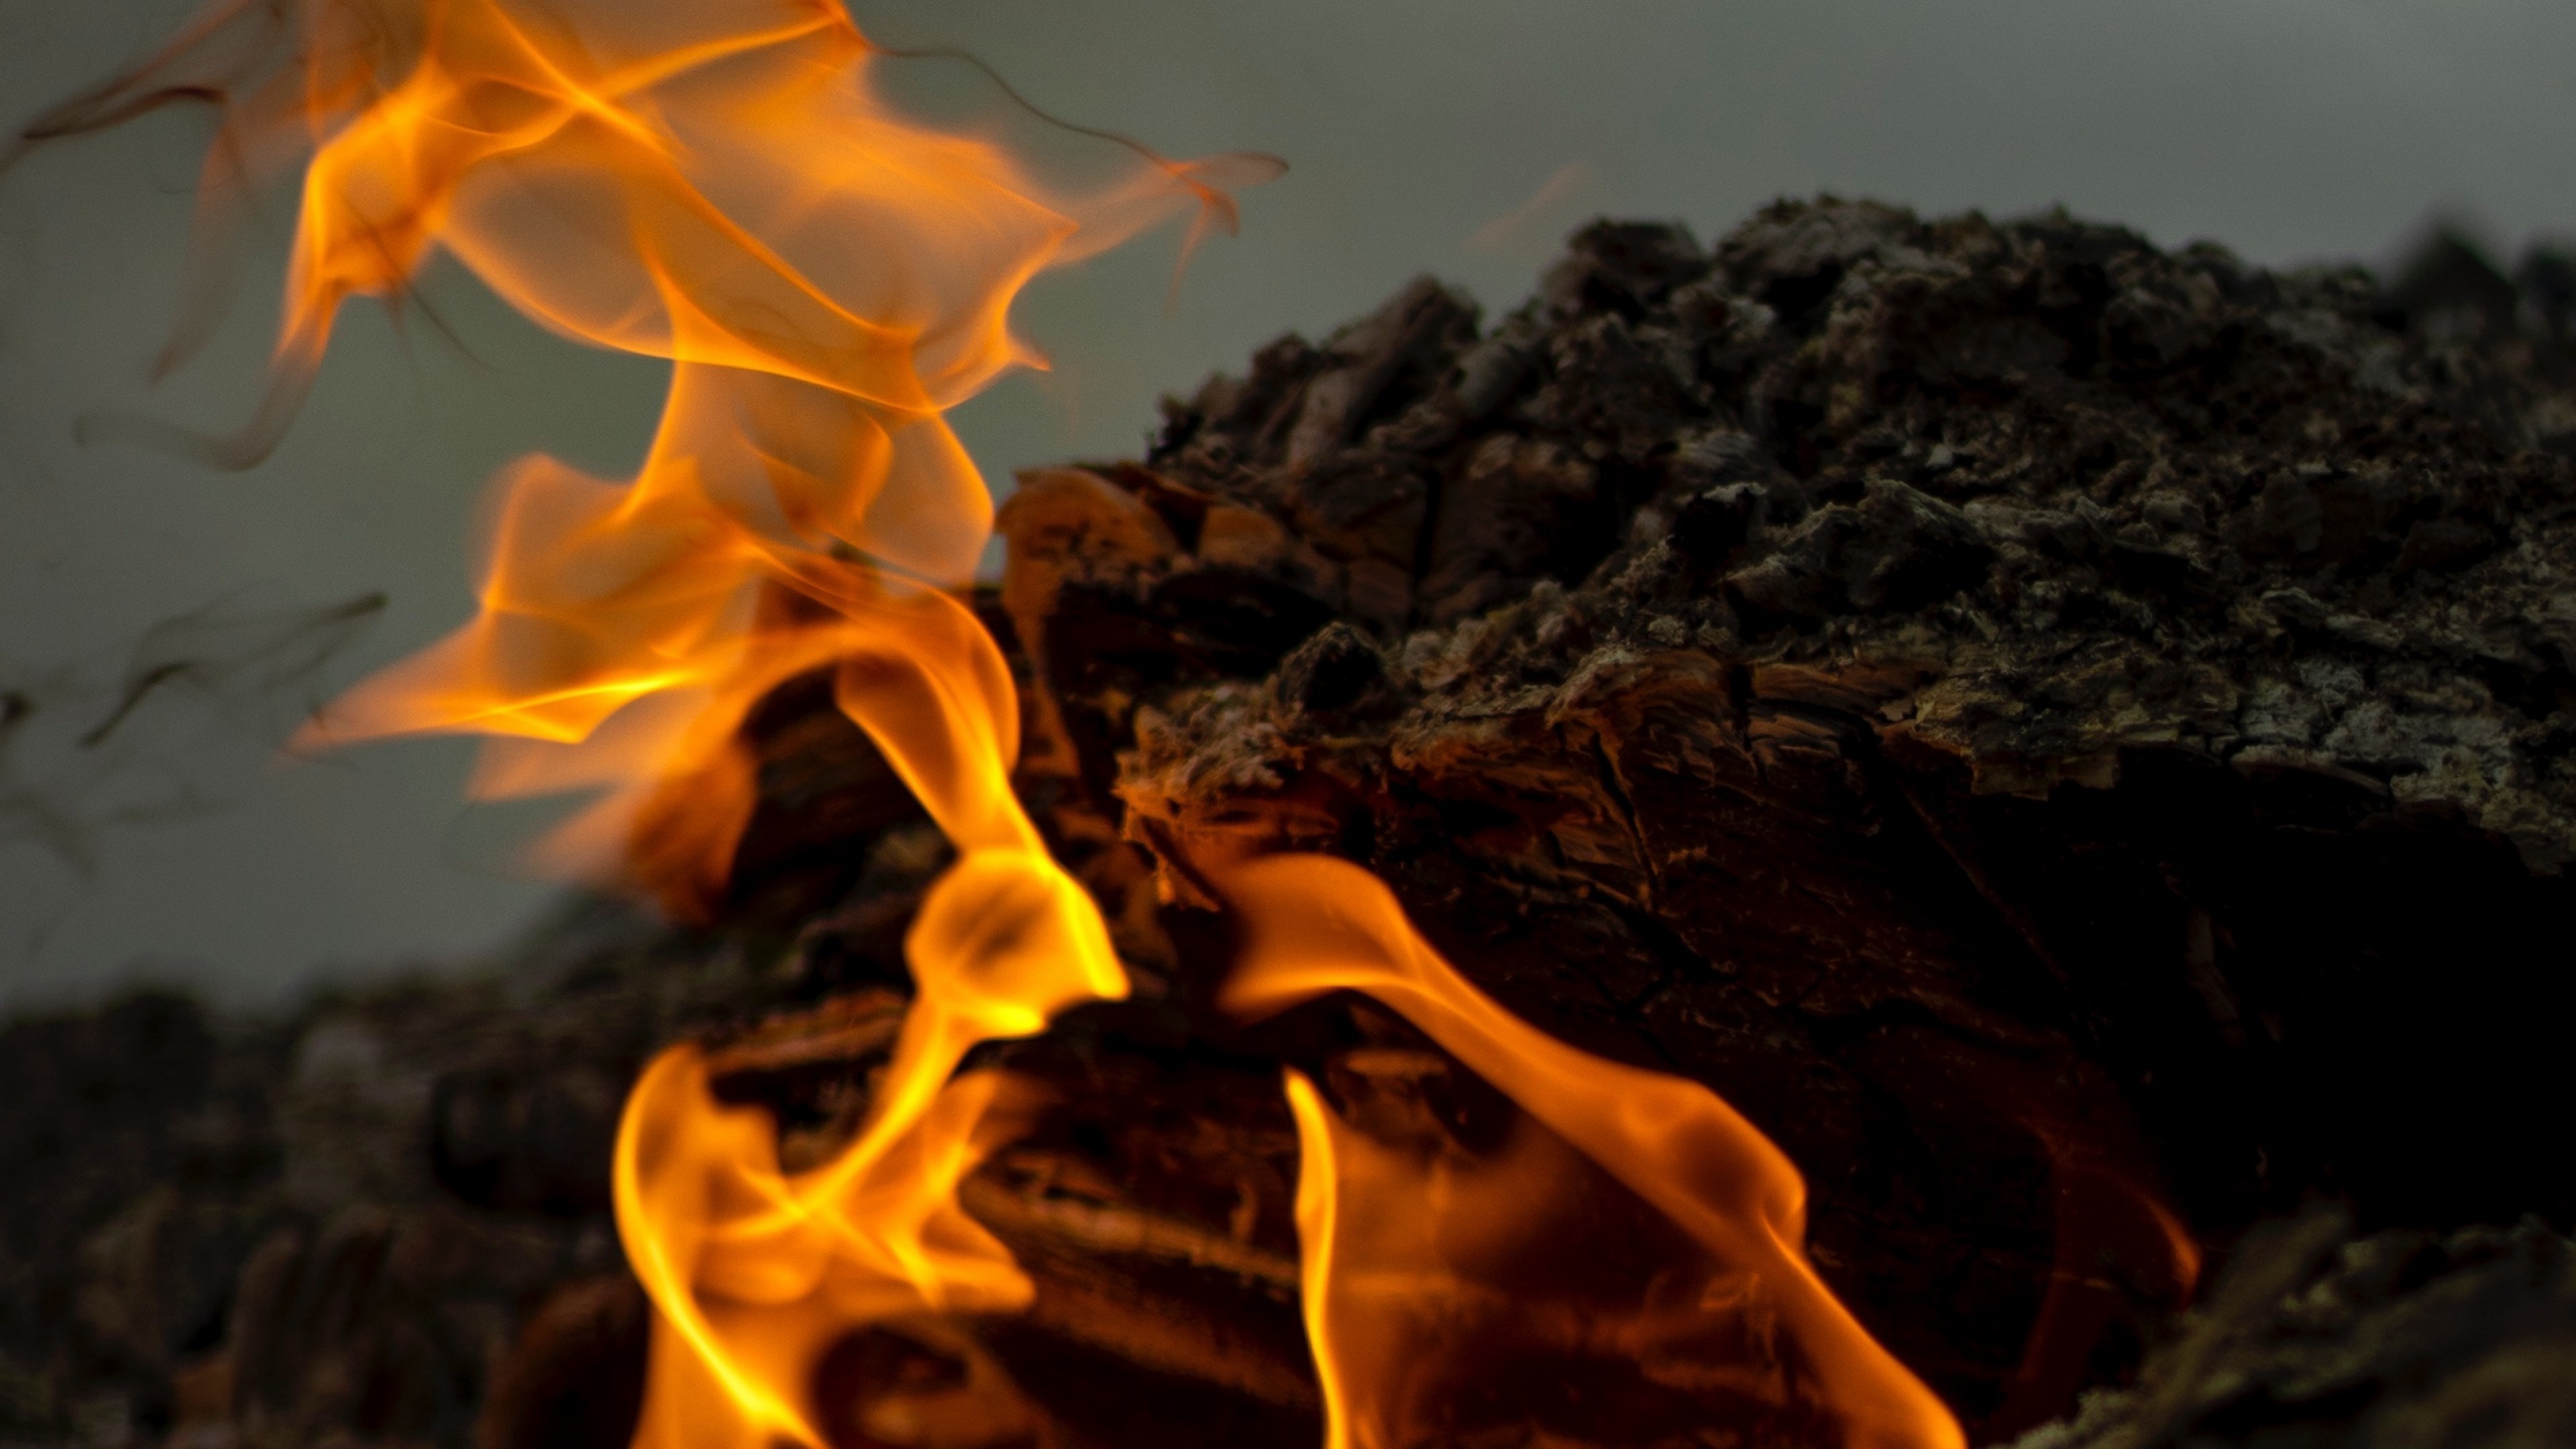 Intense flames, Fiery glow, Close-up view, Vibrant colors, Heat and energy, 3840x2160 4K Desktop